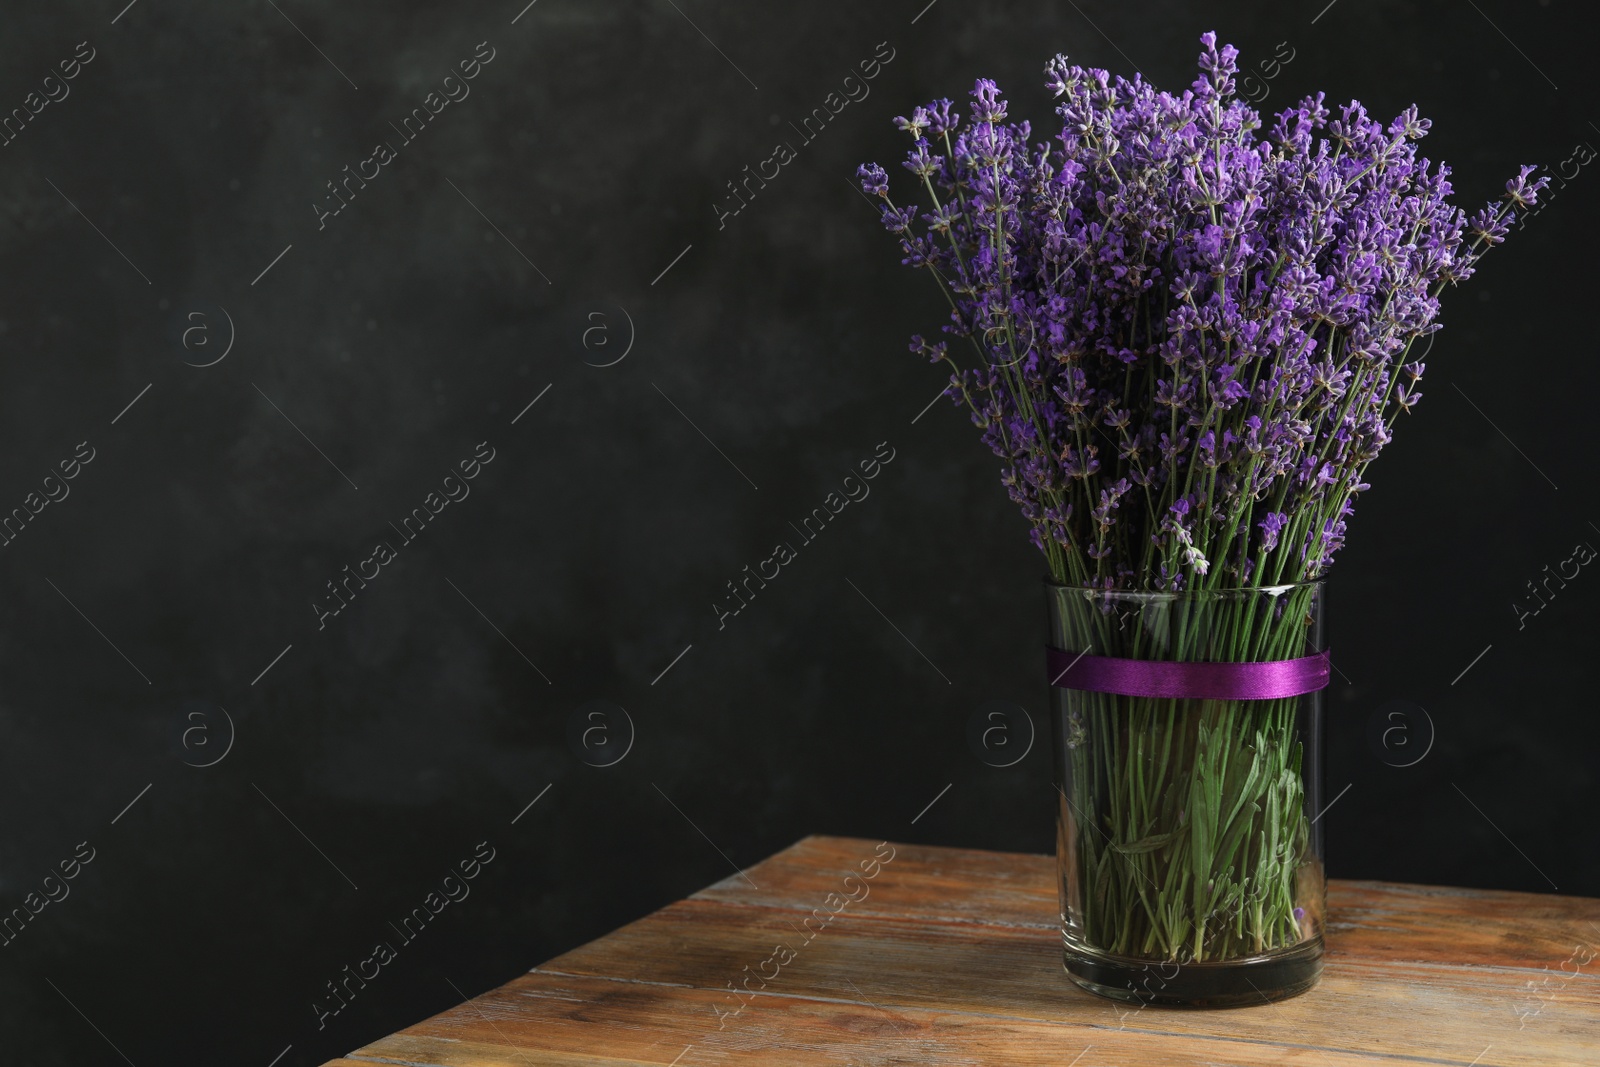 Photo of Beautiful lavender flowers in glass vase on wooden table against dark background. Space for text